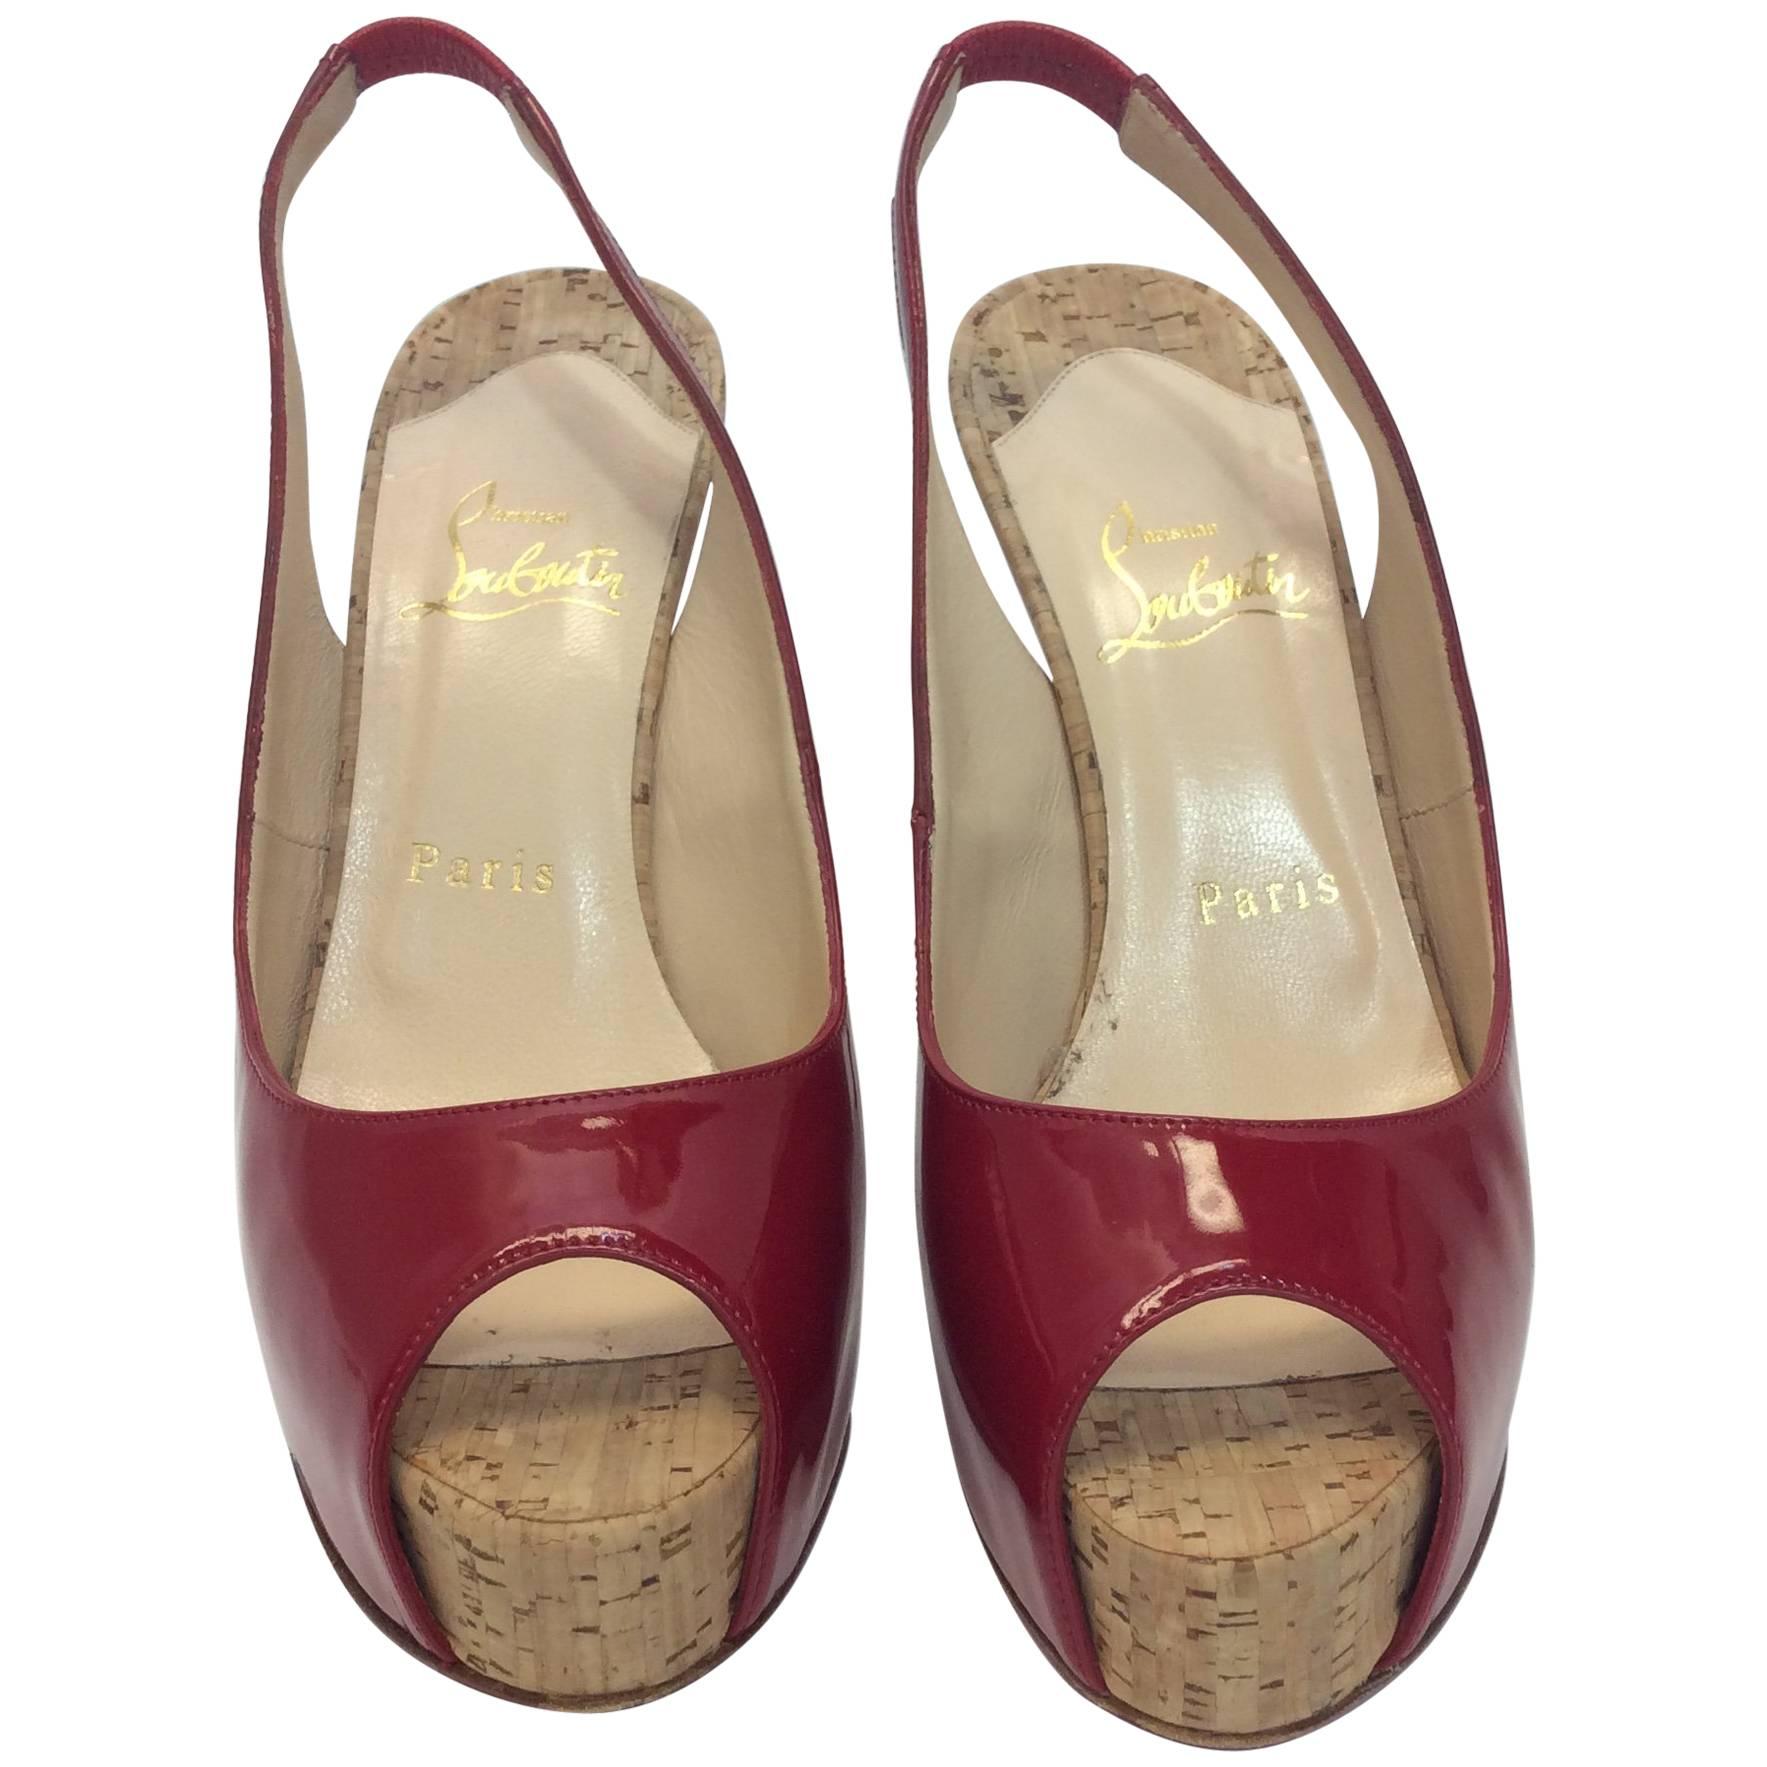 Christian Louboutin Patent Leather Peep Toe Pumps For Sale